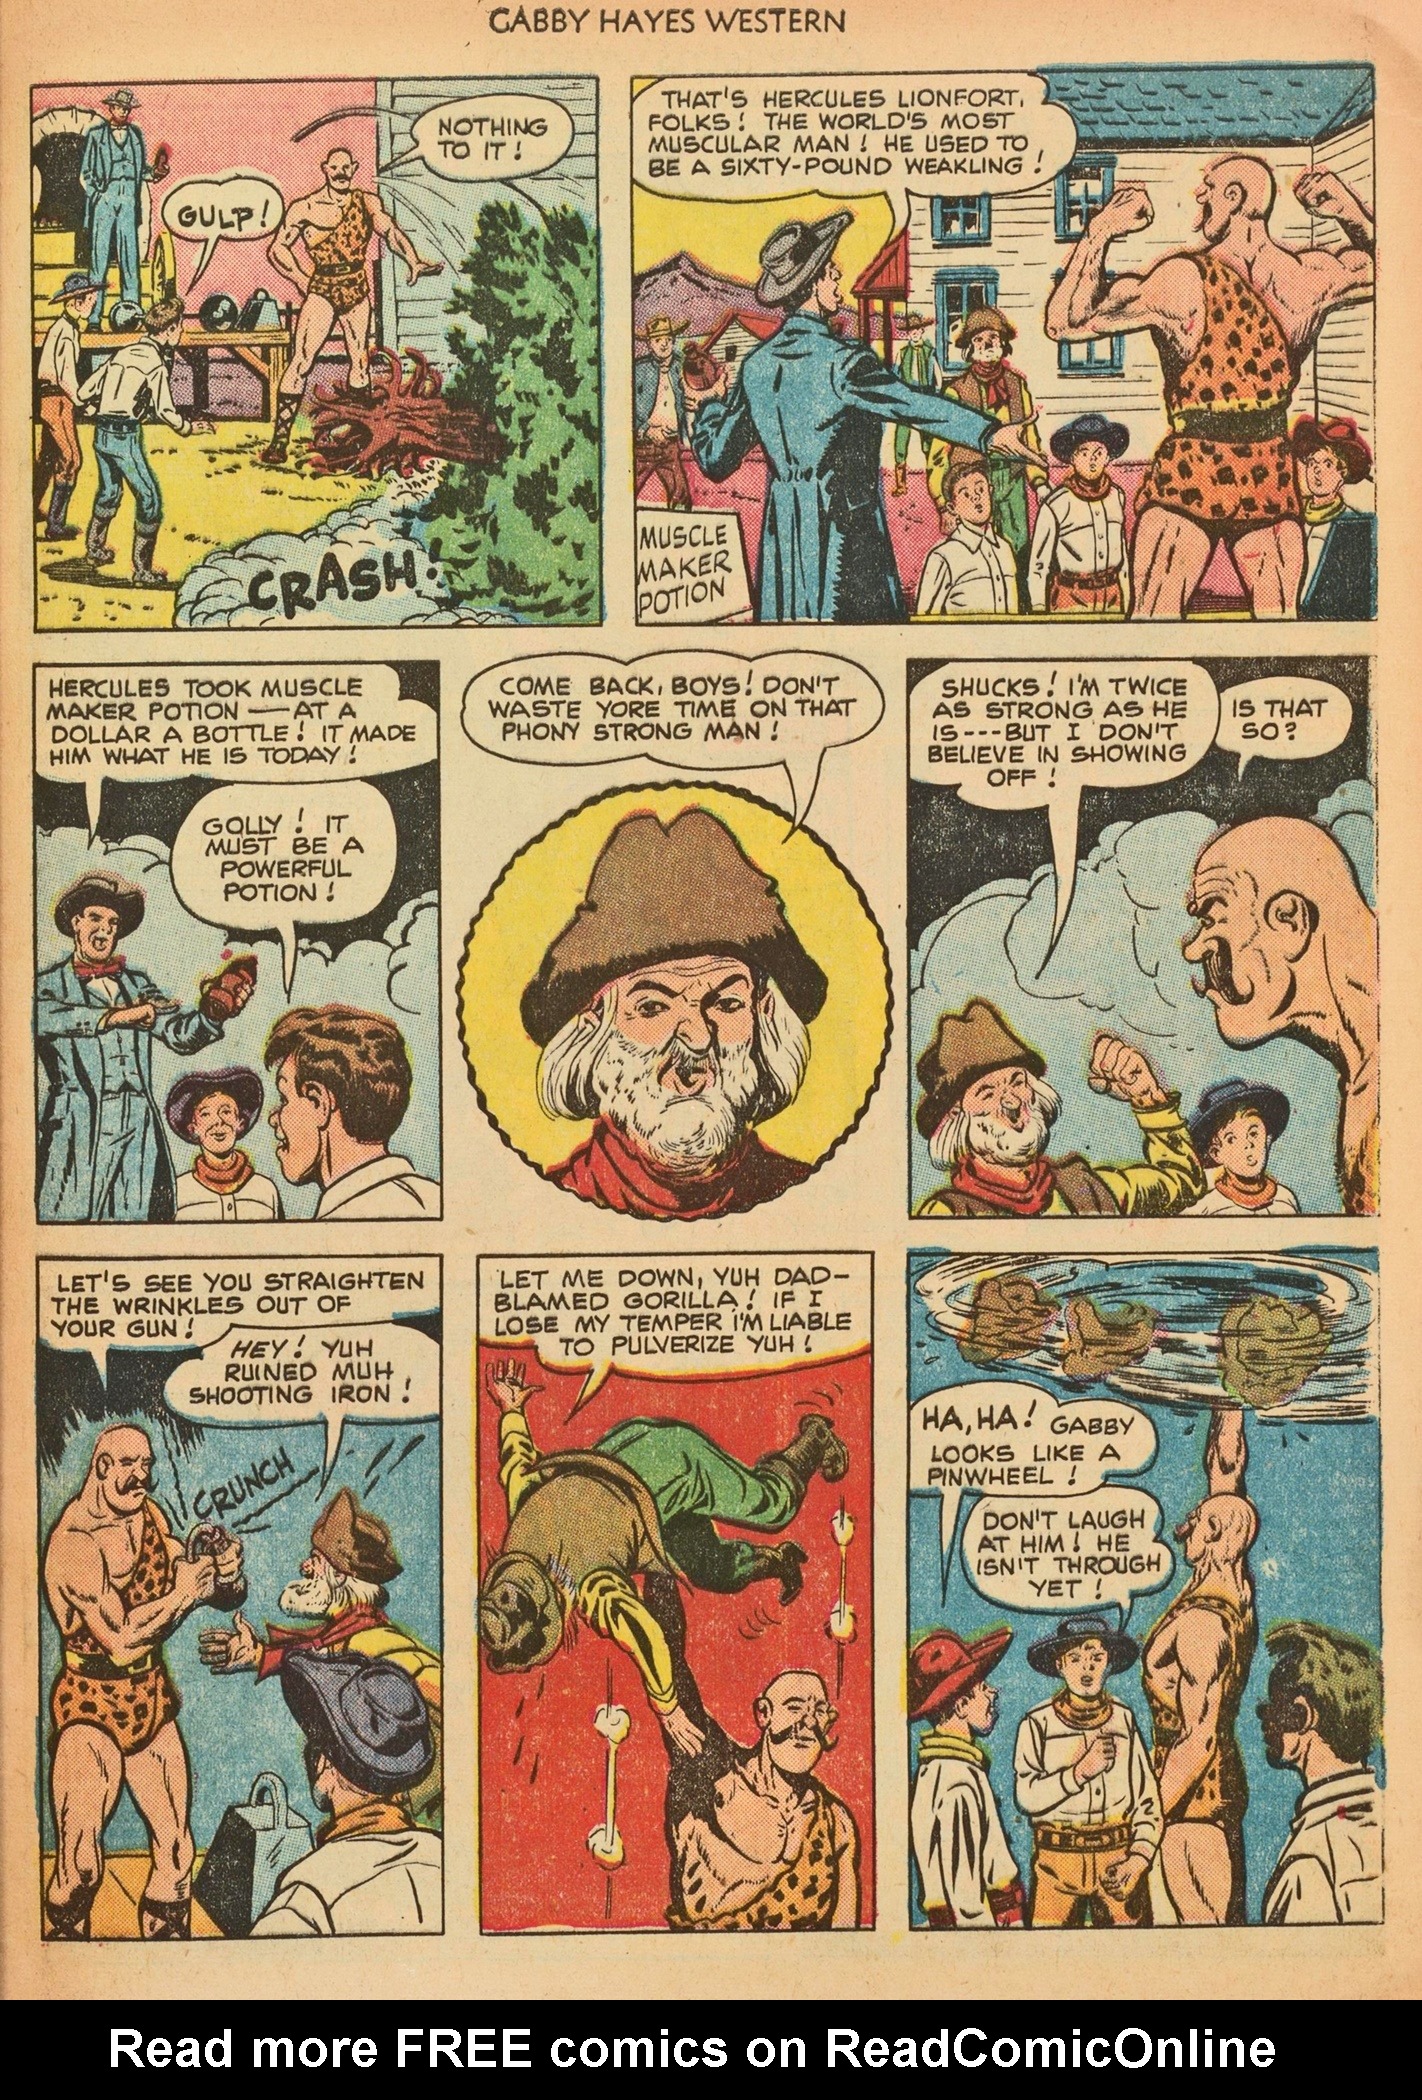 Read online Gabby Hayes Western comic -  Issue #36 - 29